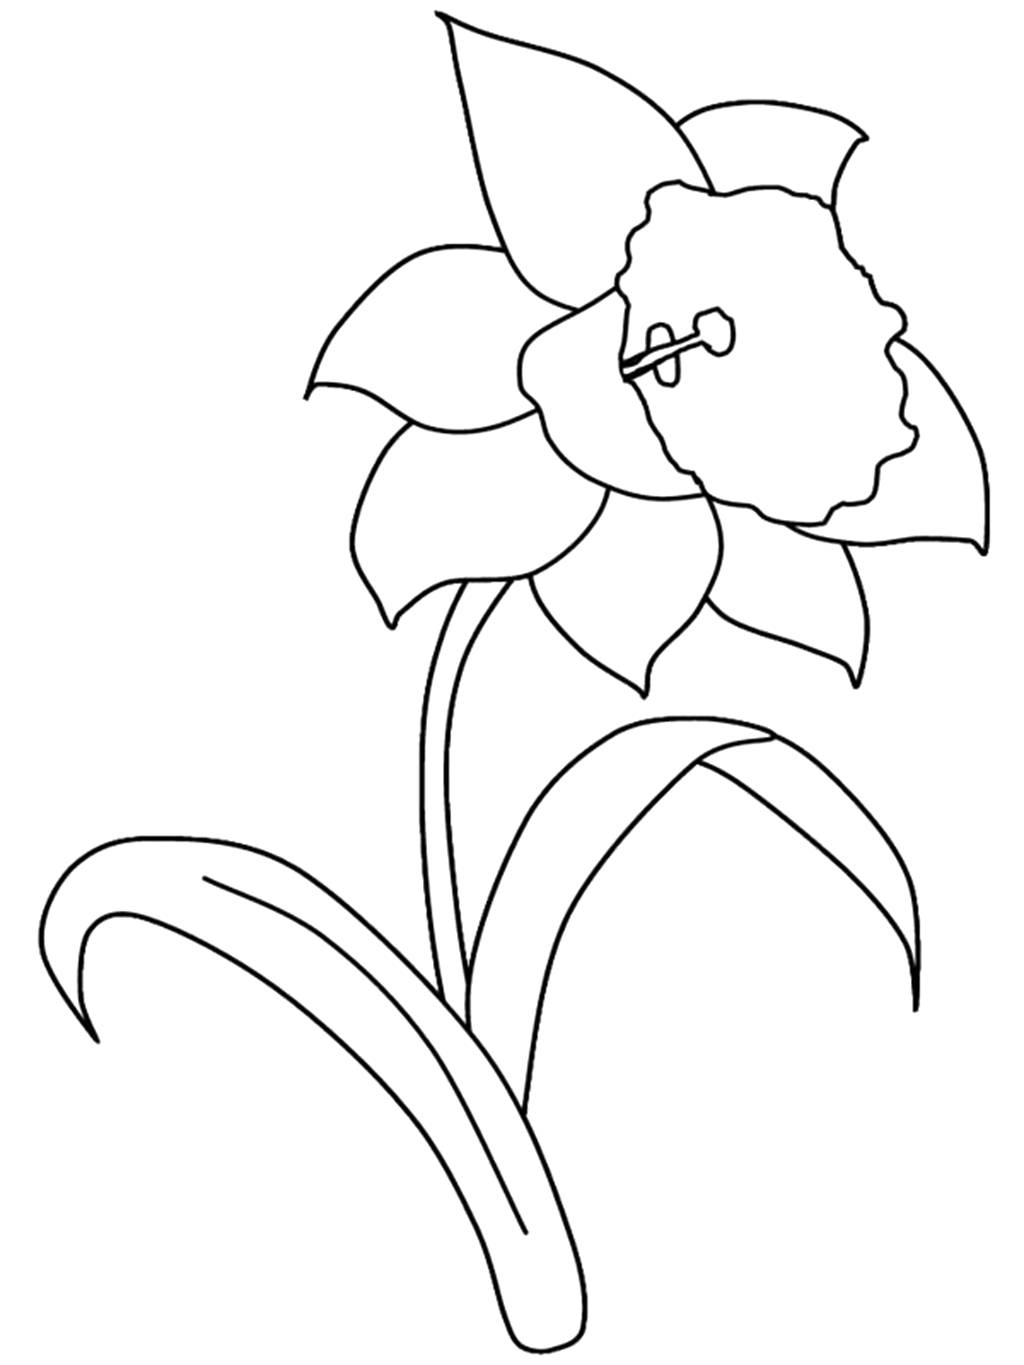 Daffodil Flower Coloring Page / Printable Spring Coloring Pages